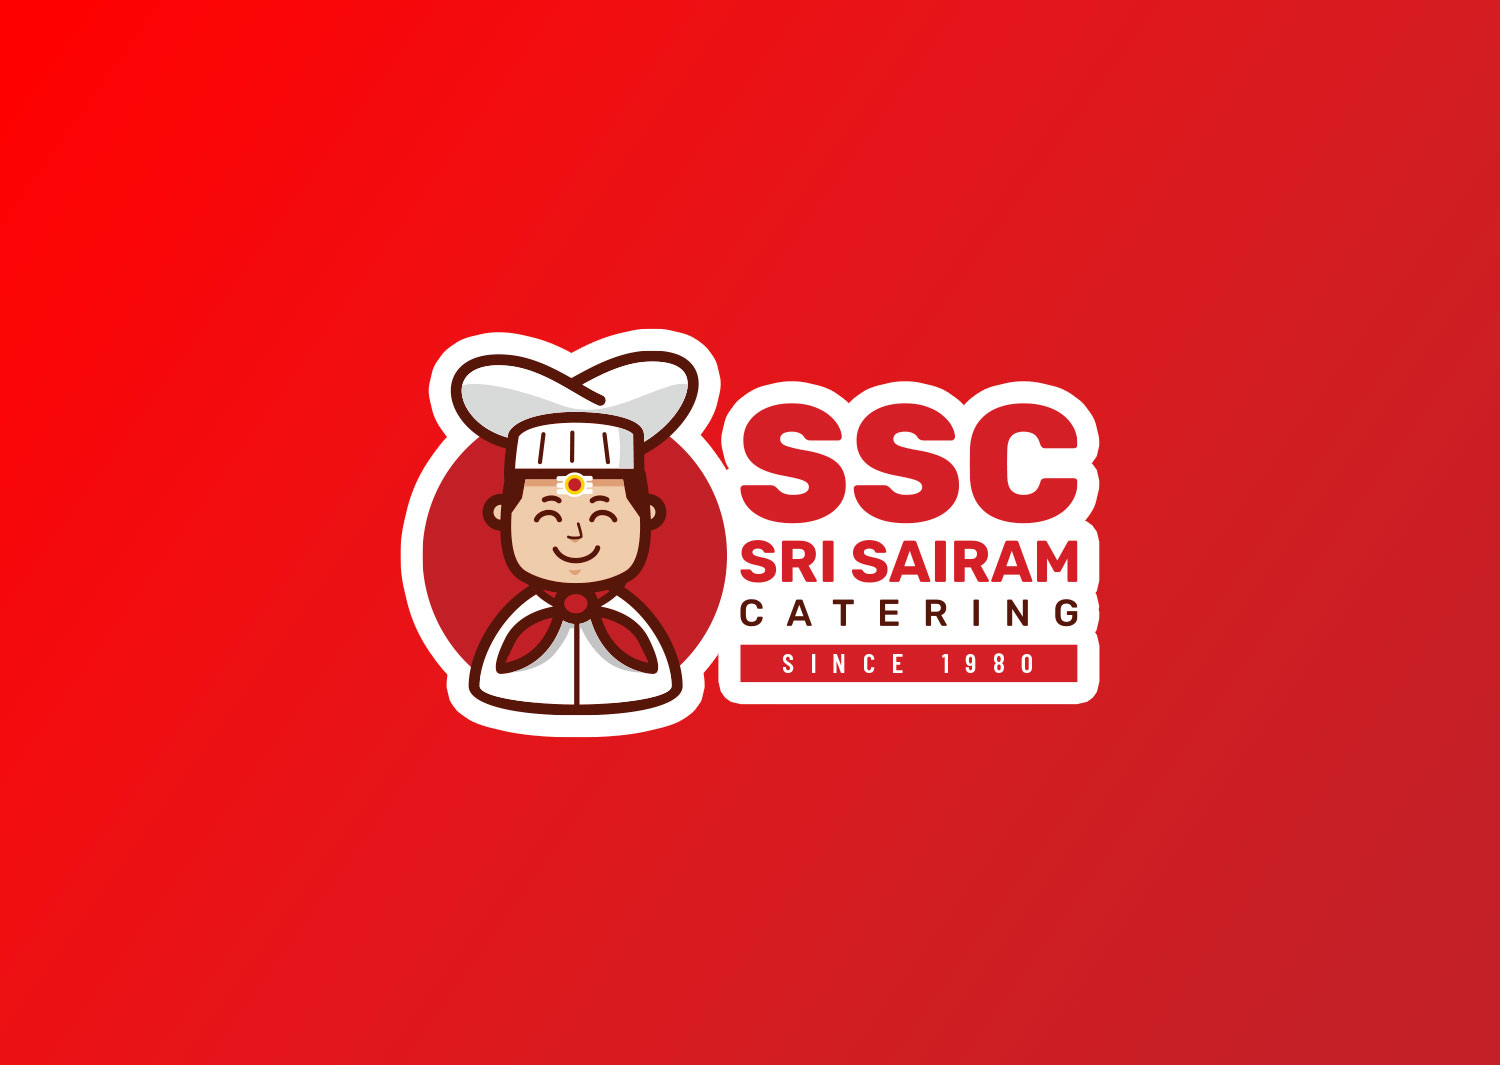 Srisairam Catering Showcase: Dsignxt's Creative Excellence in Brand Elevation